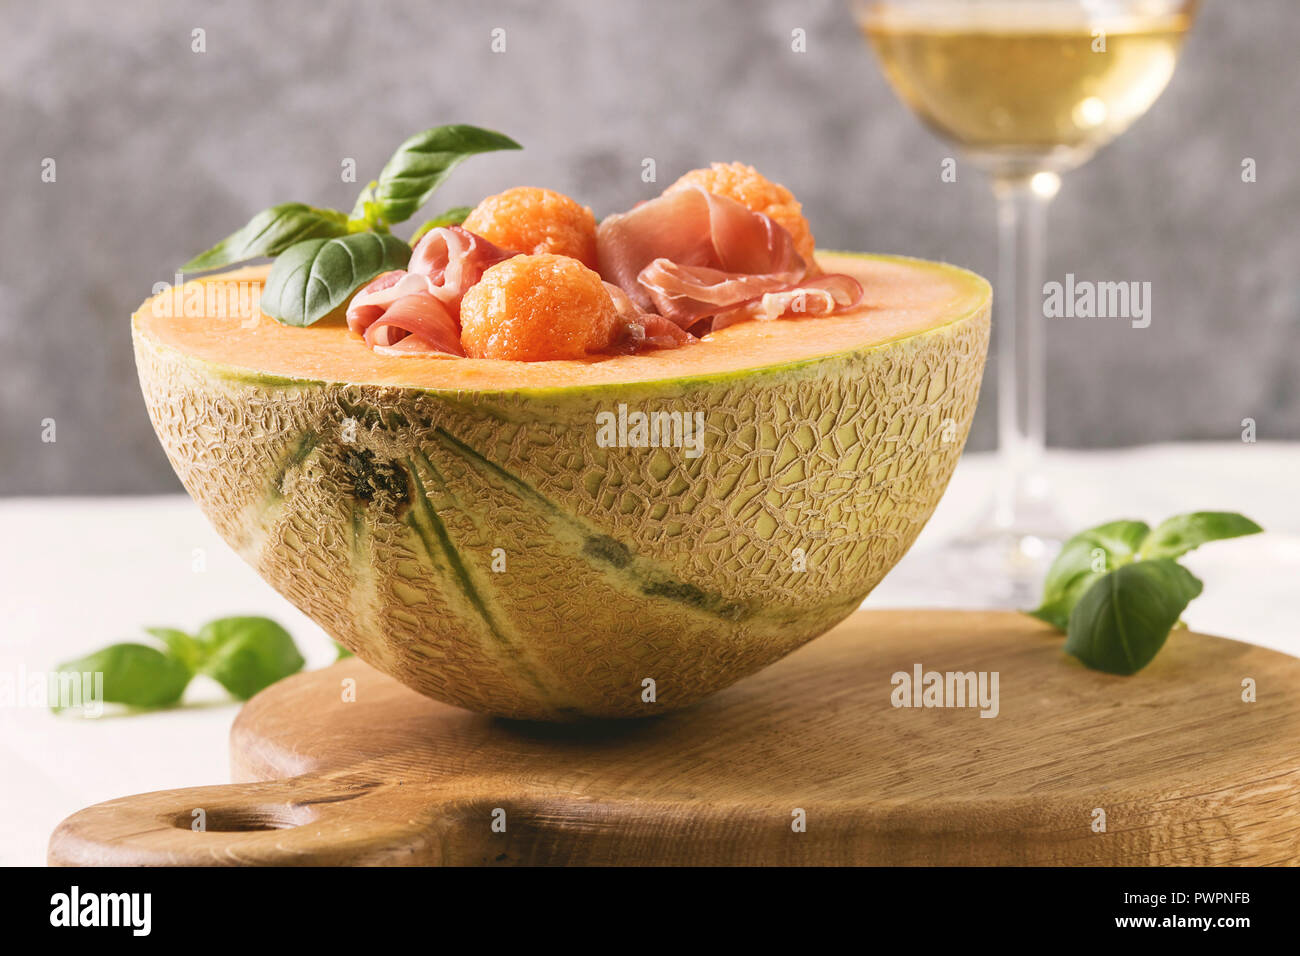 Melon and ham or prosciutto salad served in half of Cantaloupe melon, decorated by fresh basil standing on wooden serving board over white tablecloth Stock Photo